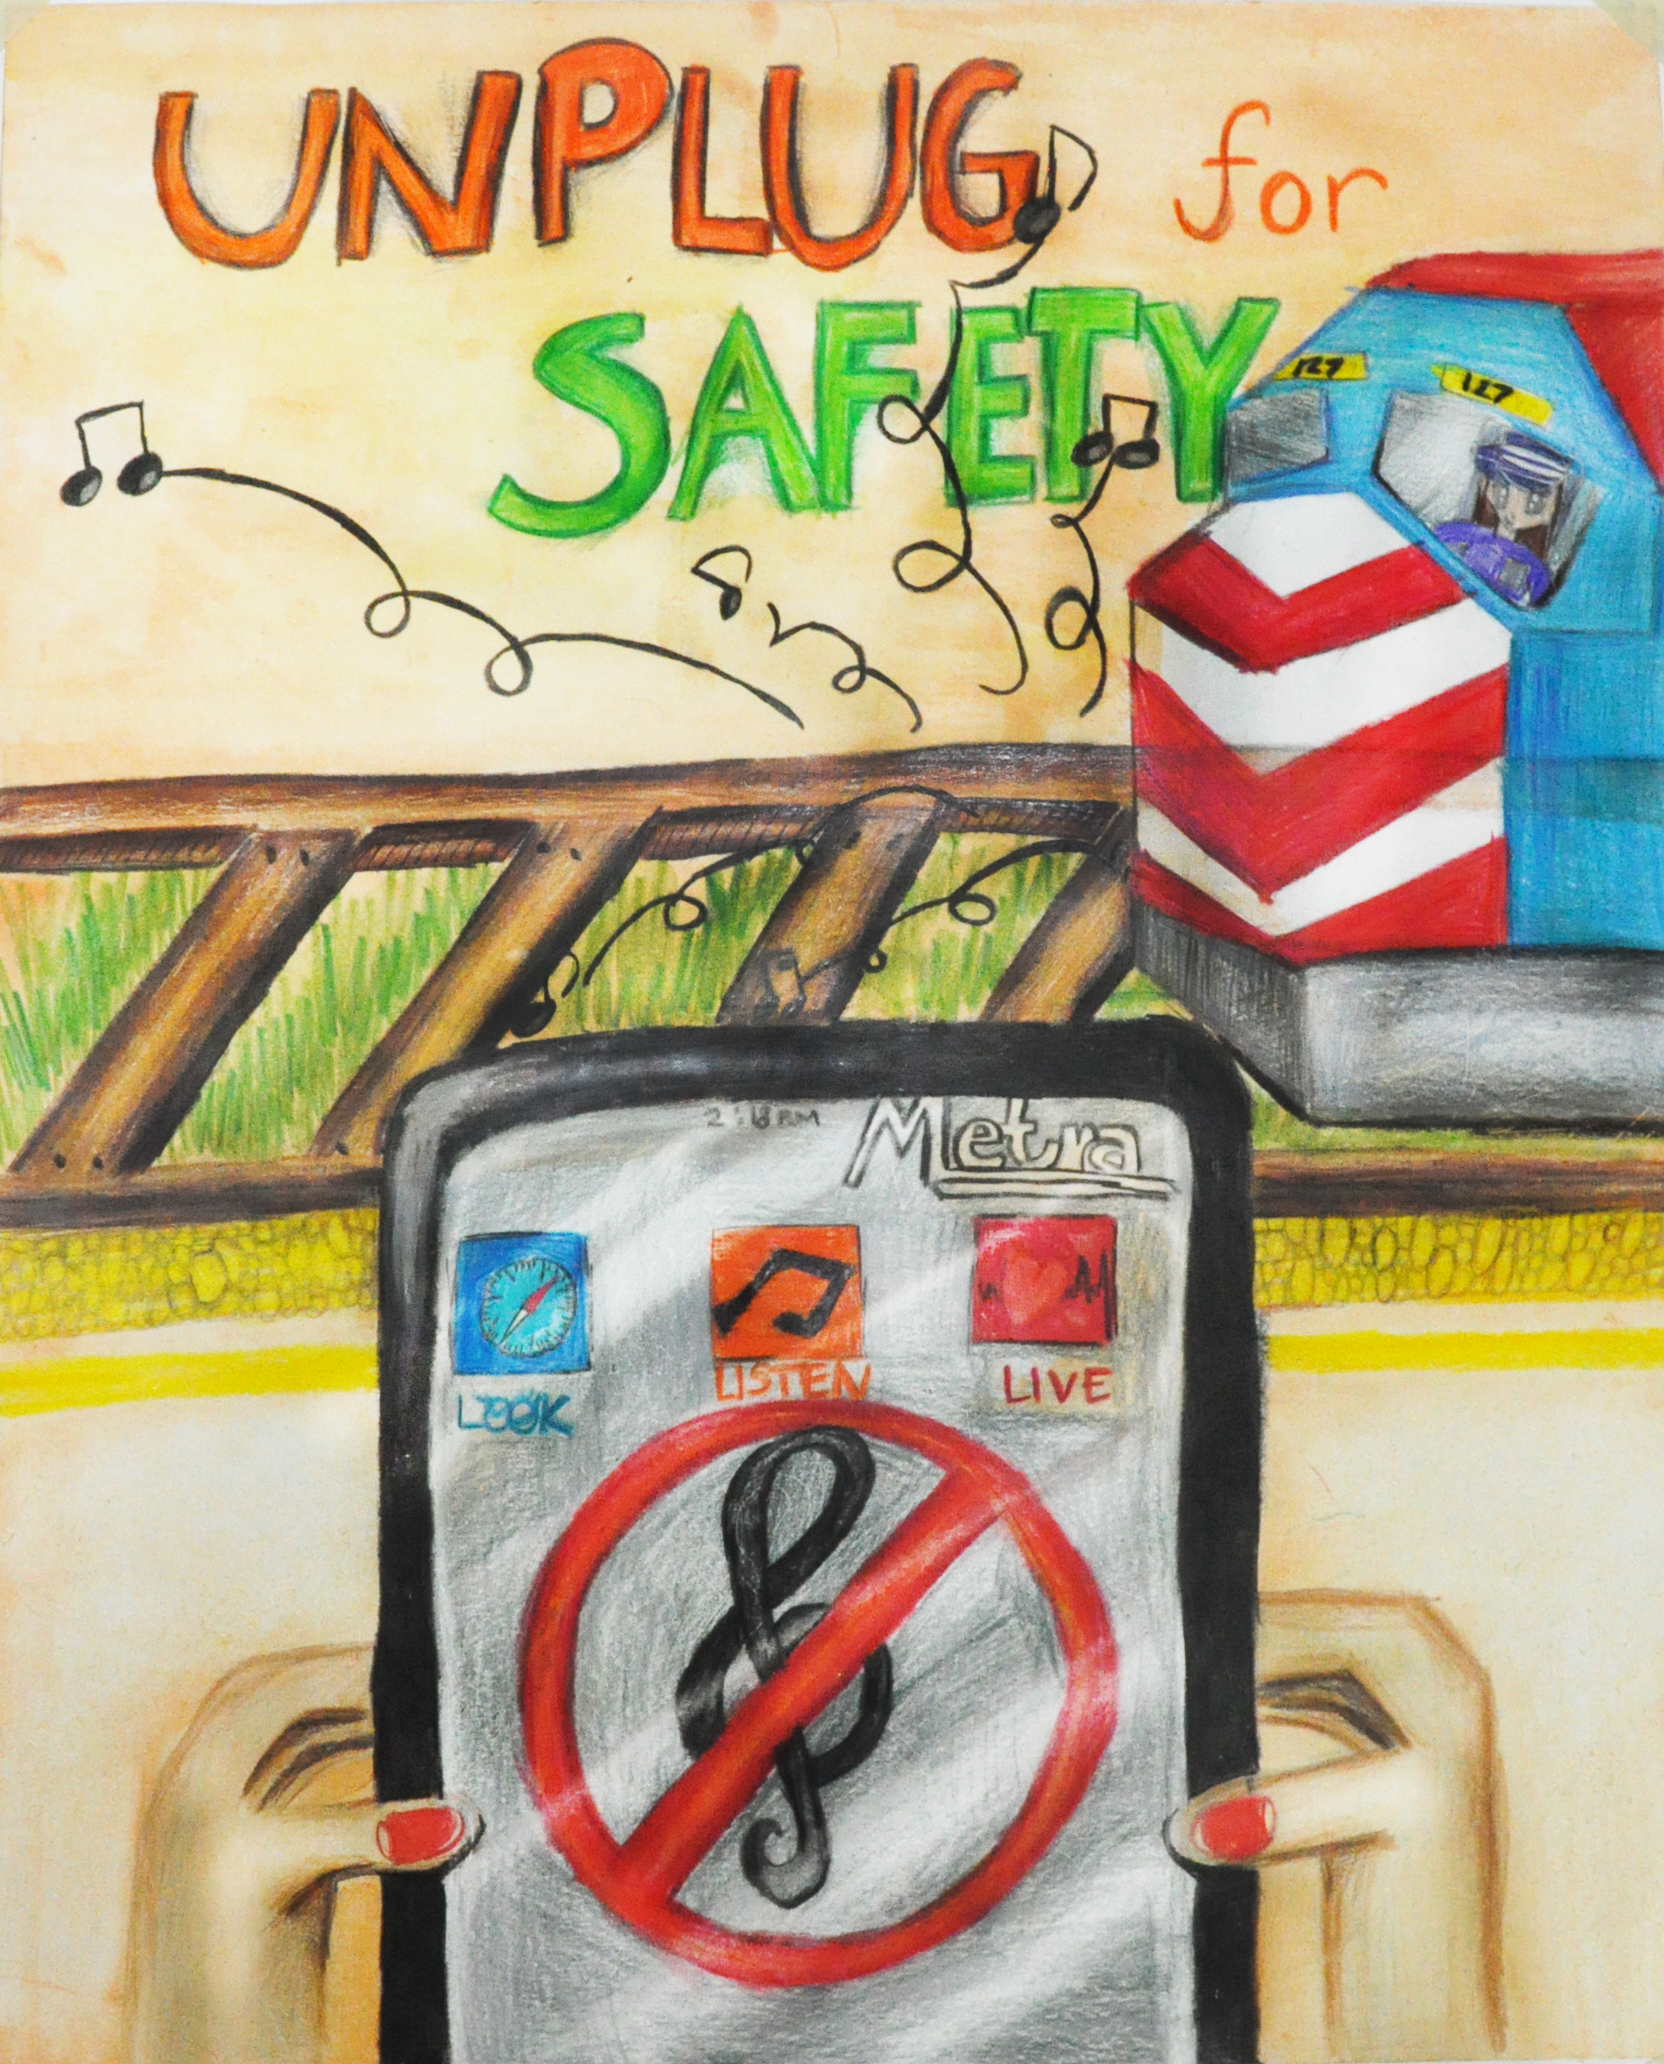 National Safety Day Drawing / Safety Day Posters - YouTube-saigonsouth.com.vn